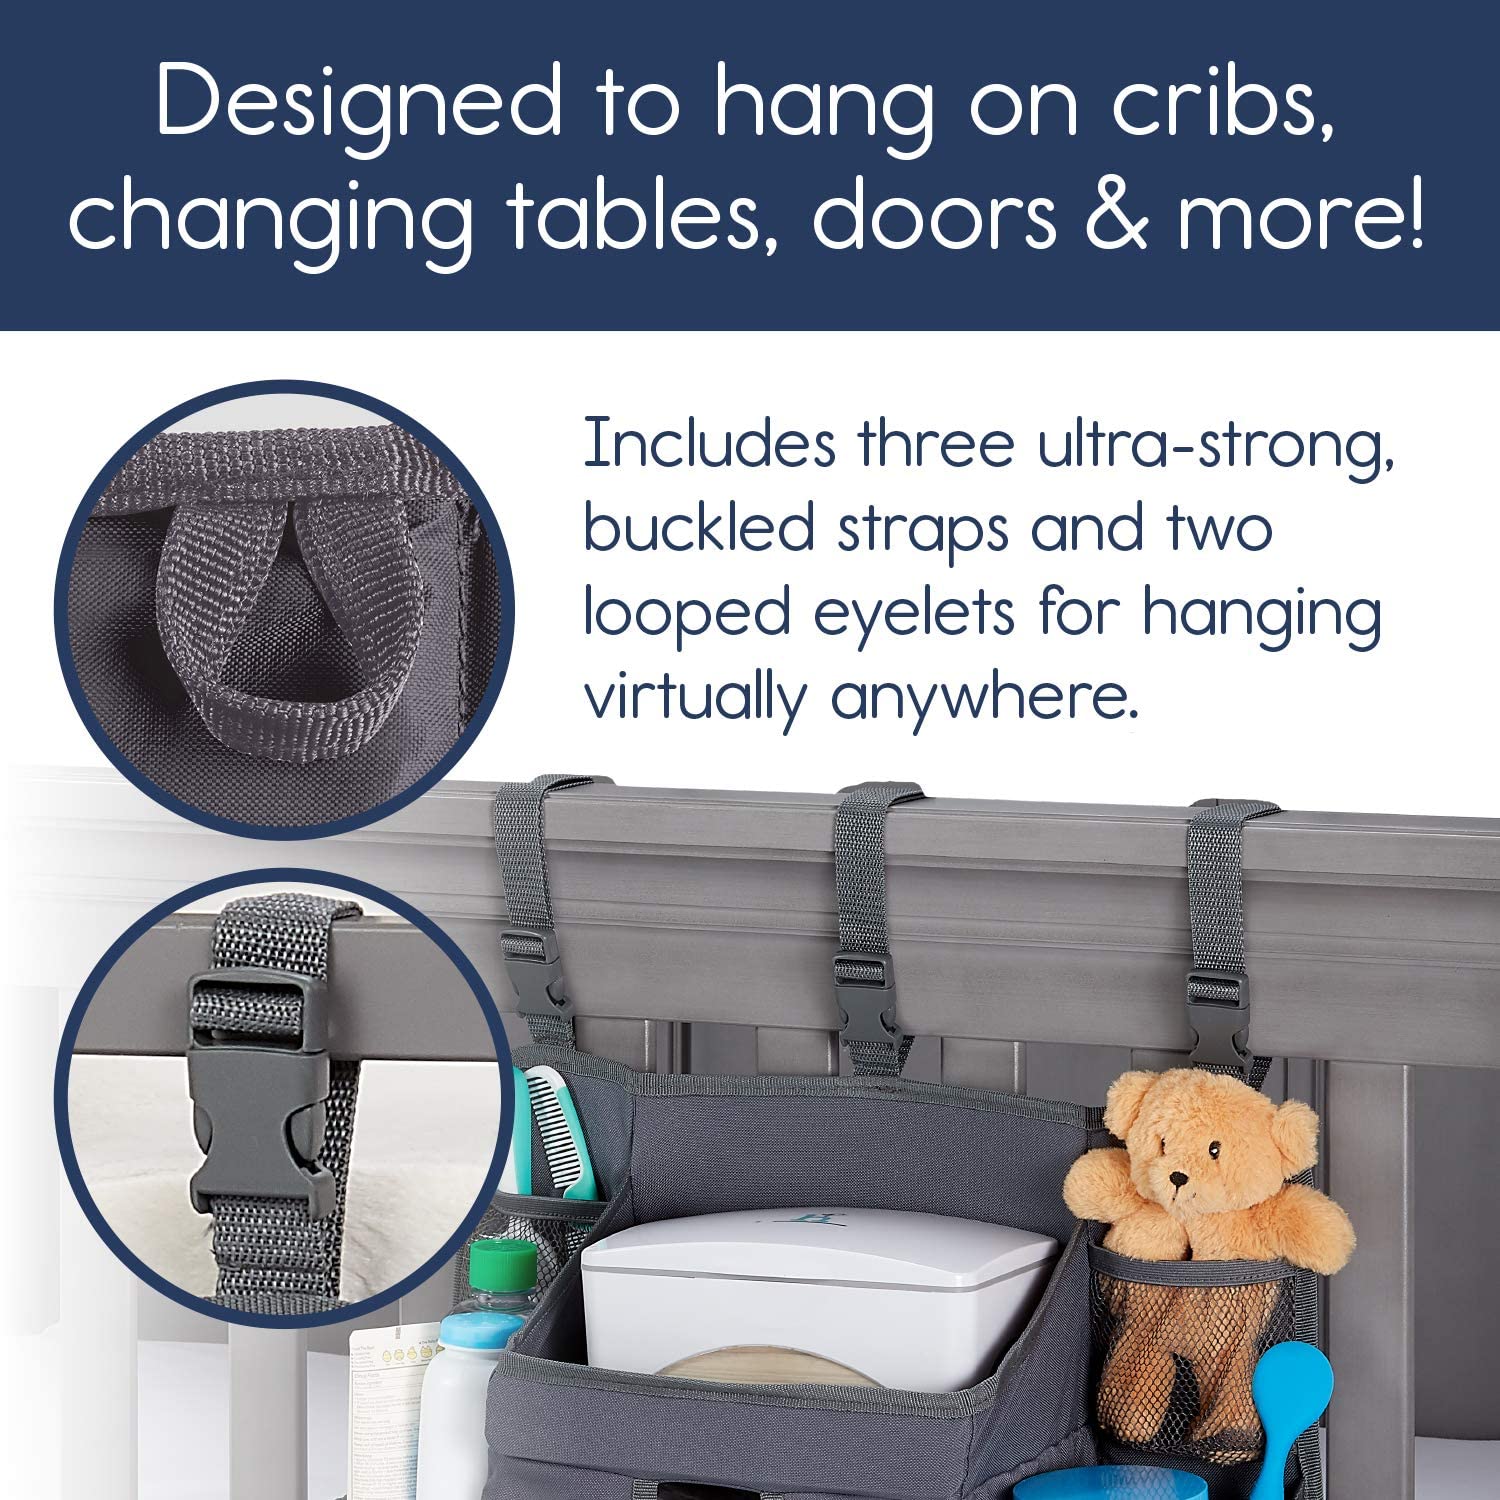 hiccapop Hanging Diaper Organizer for Changing Table, Cribs and Walls, Diaper Stacker and Nursery Organizer | Hanging Diaper Caddy Organizer for Baby Essentials | Diaper Storage Organizer Slate Gray